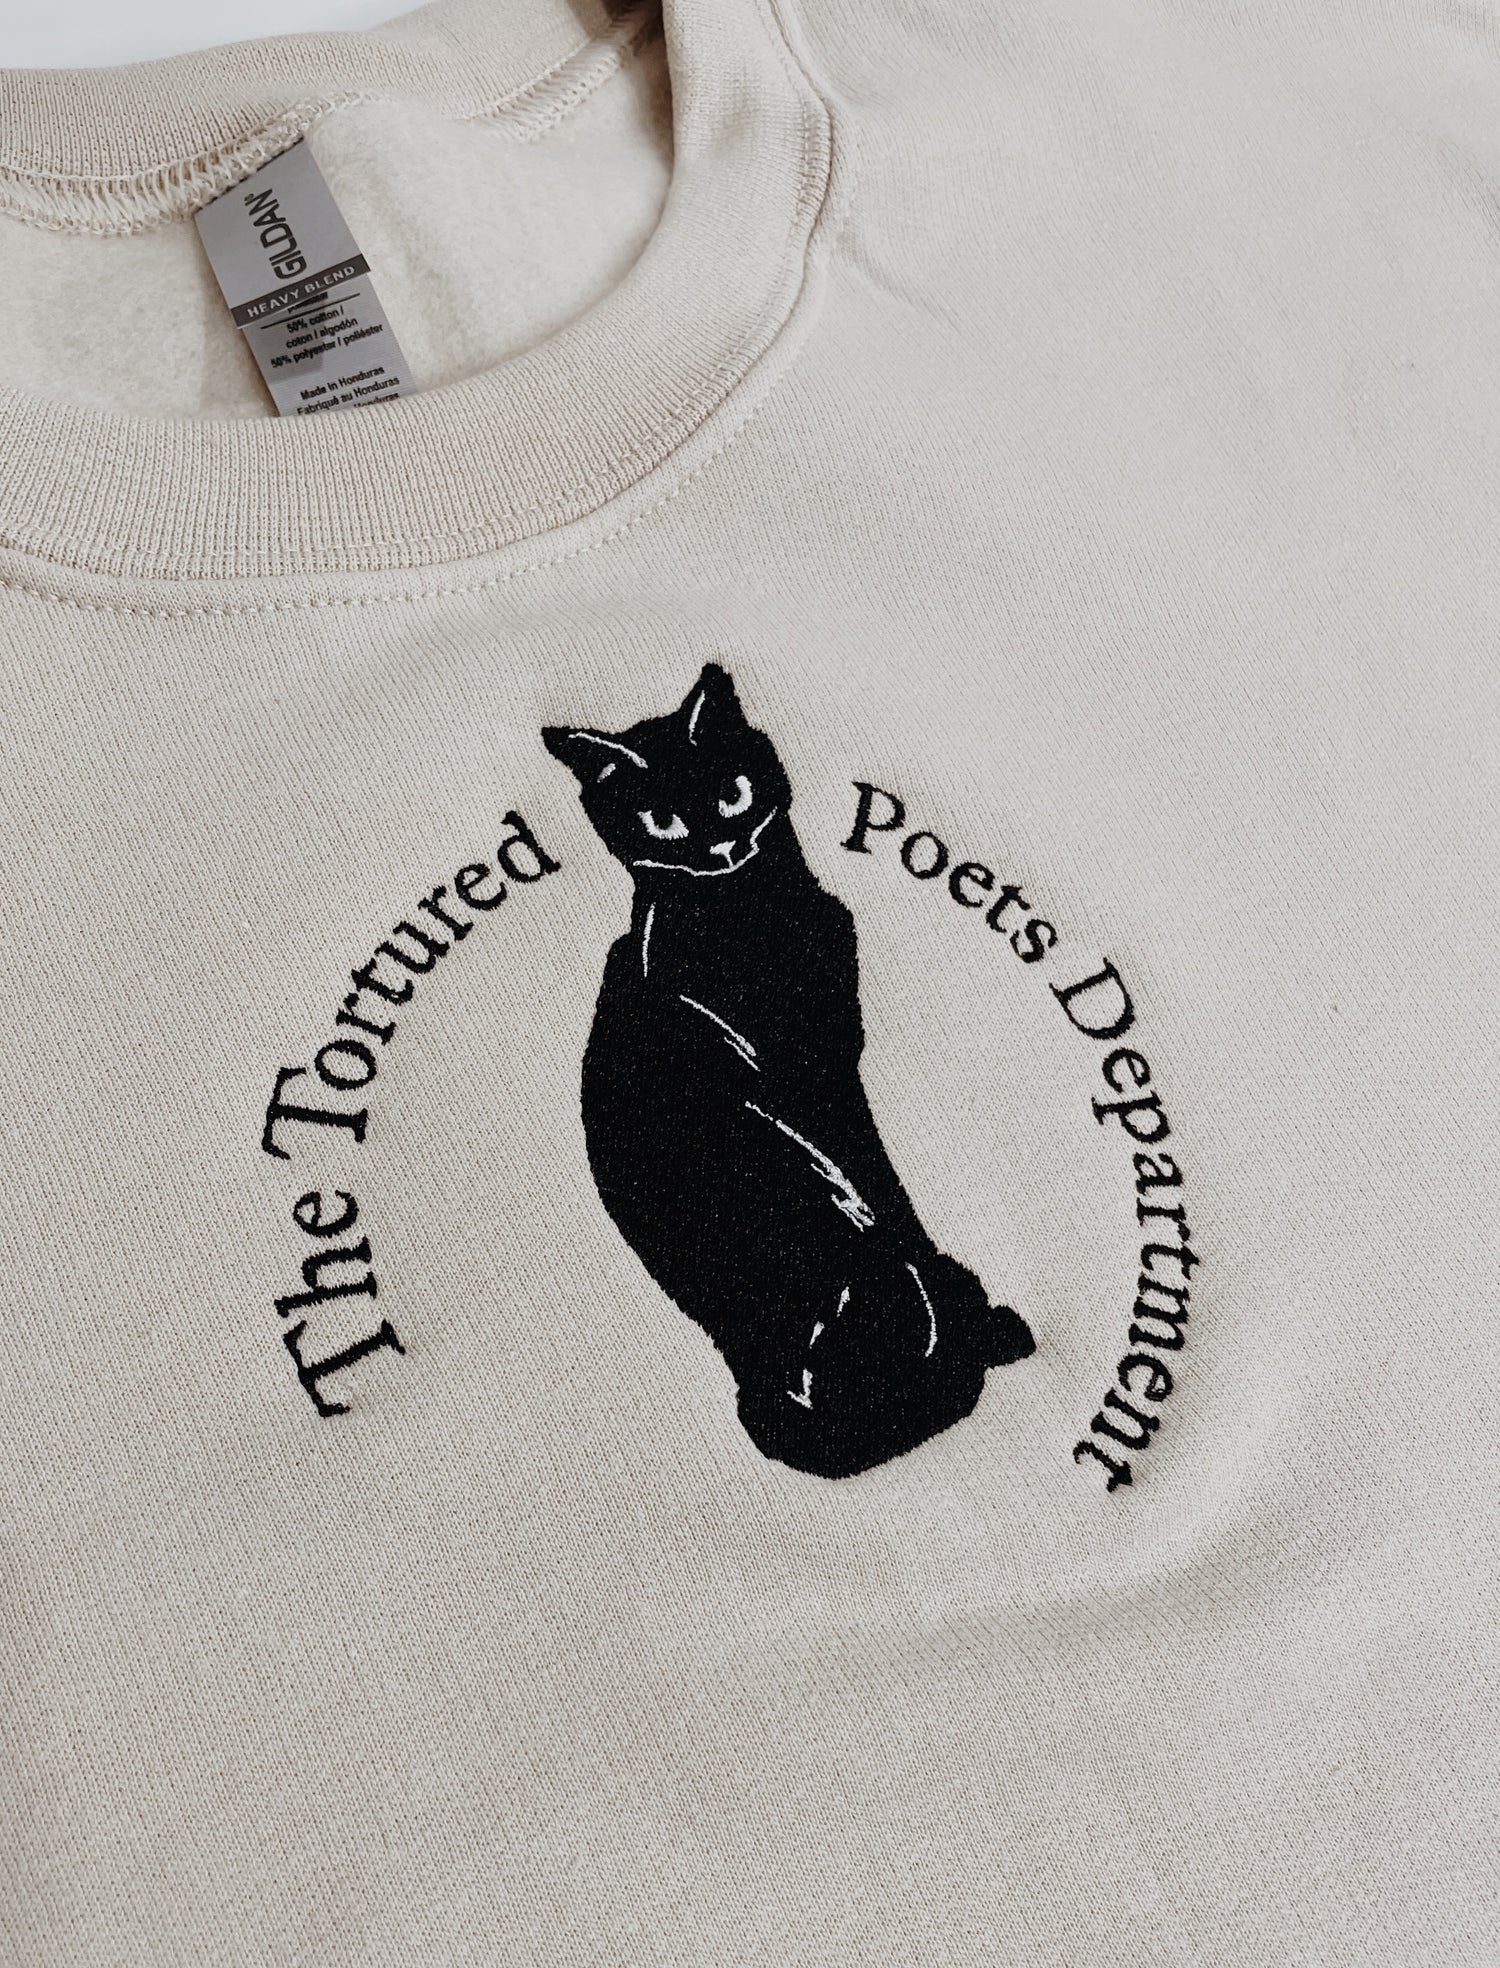 The Tortured Poets Department Embroidered Sweatshirt